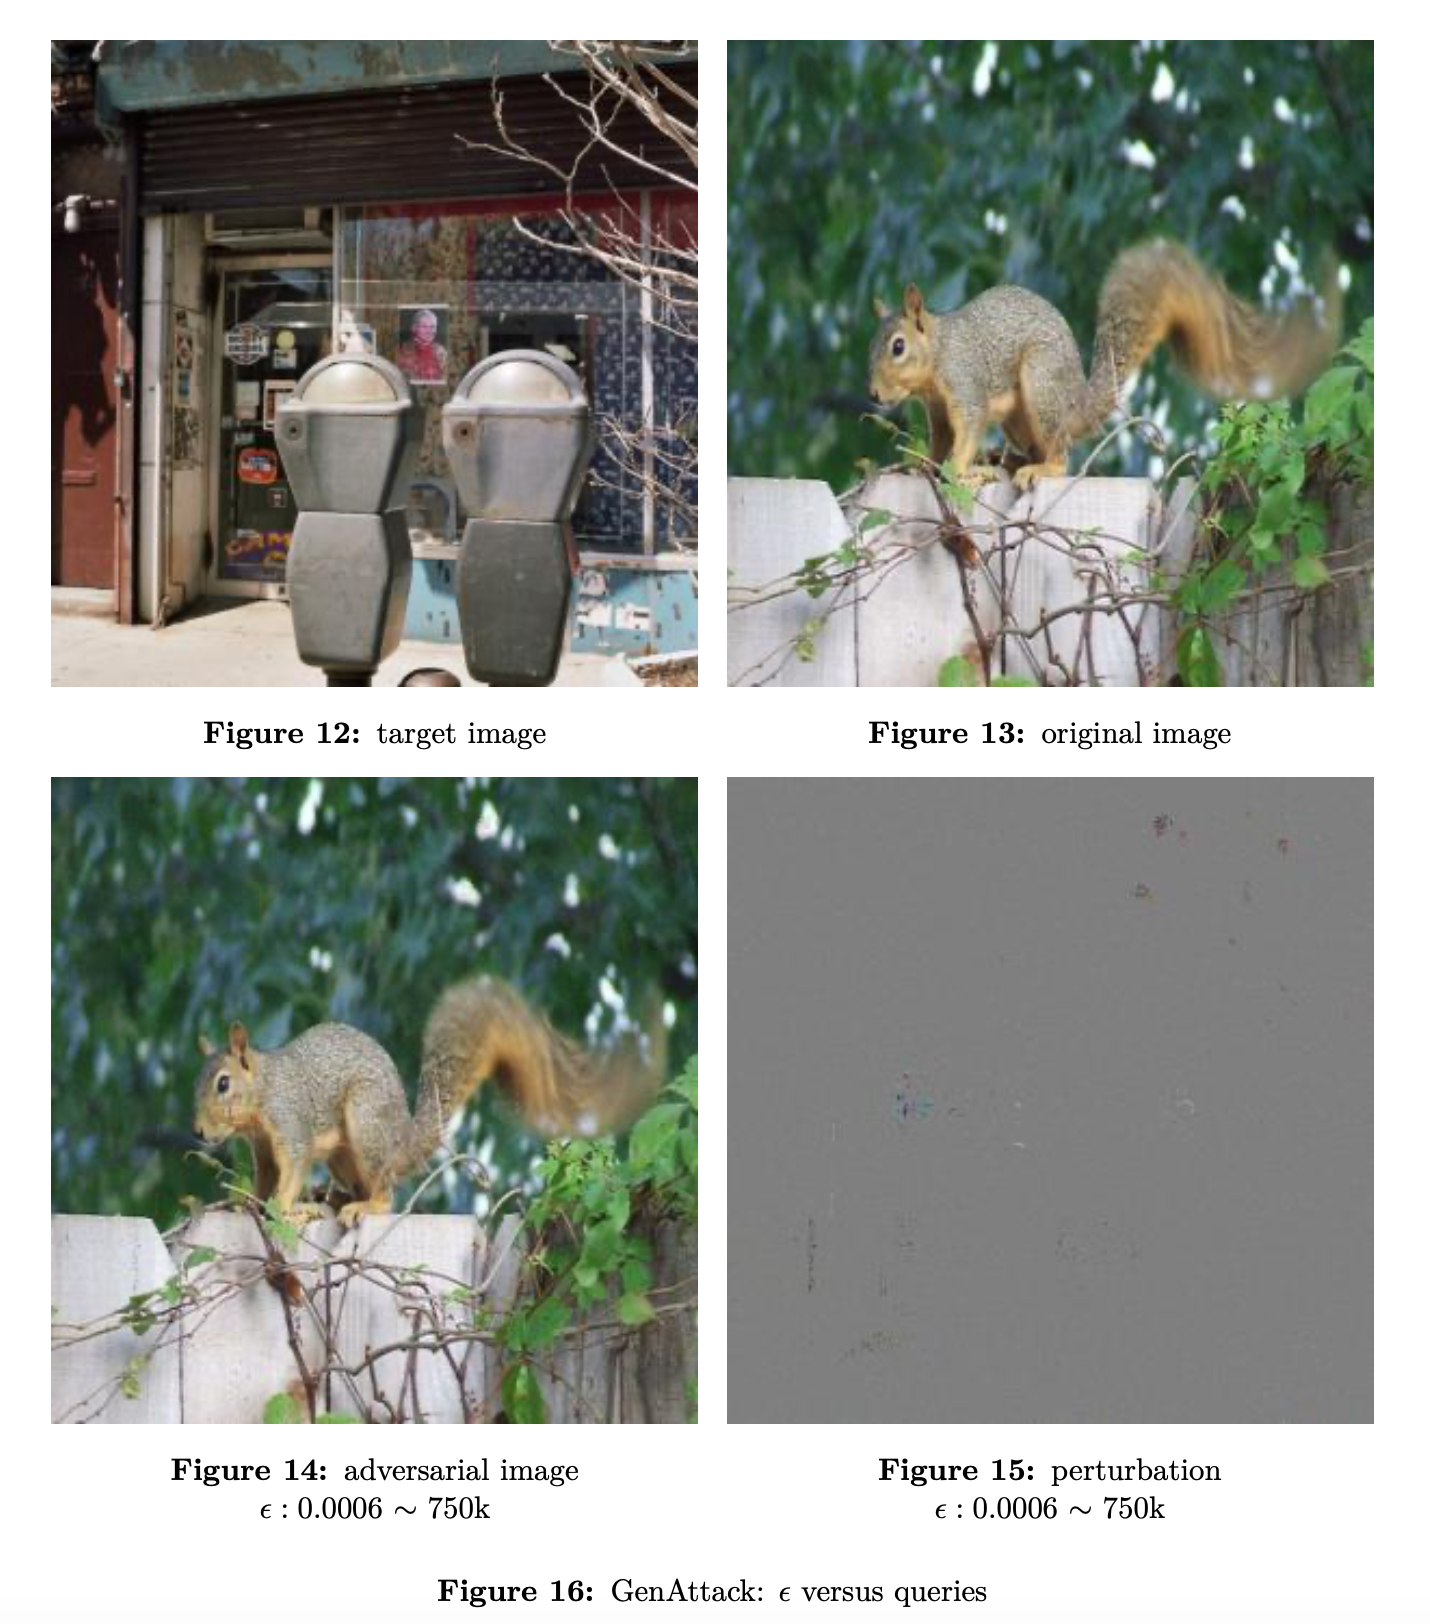 Fooling the image classifier by classifying squirrel as parking meter